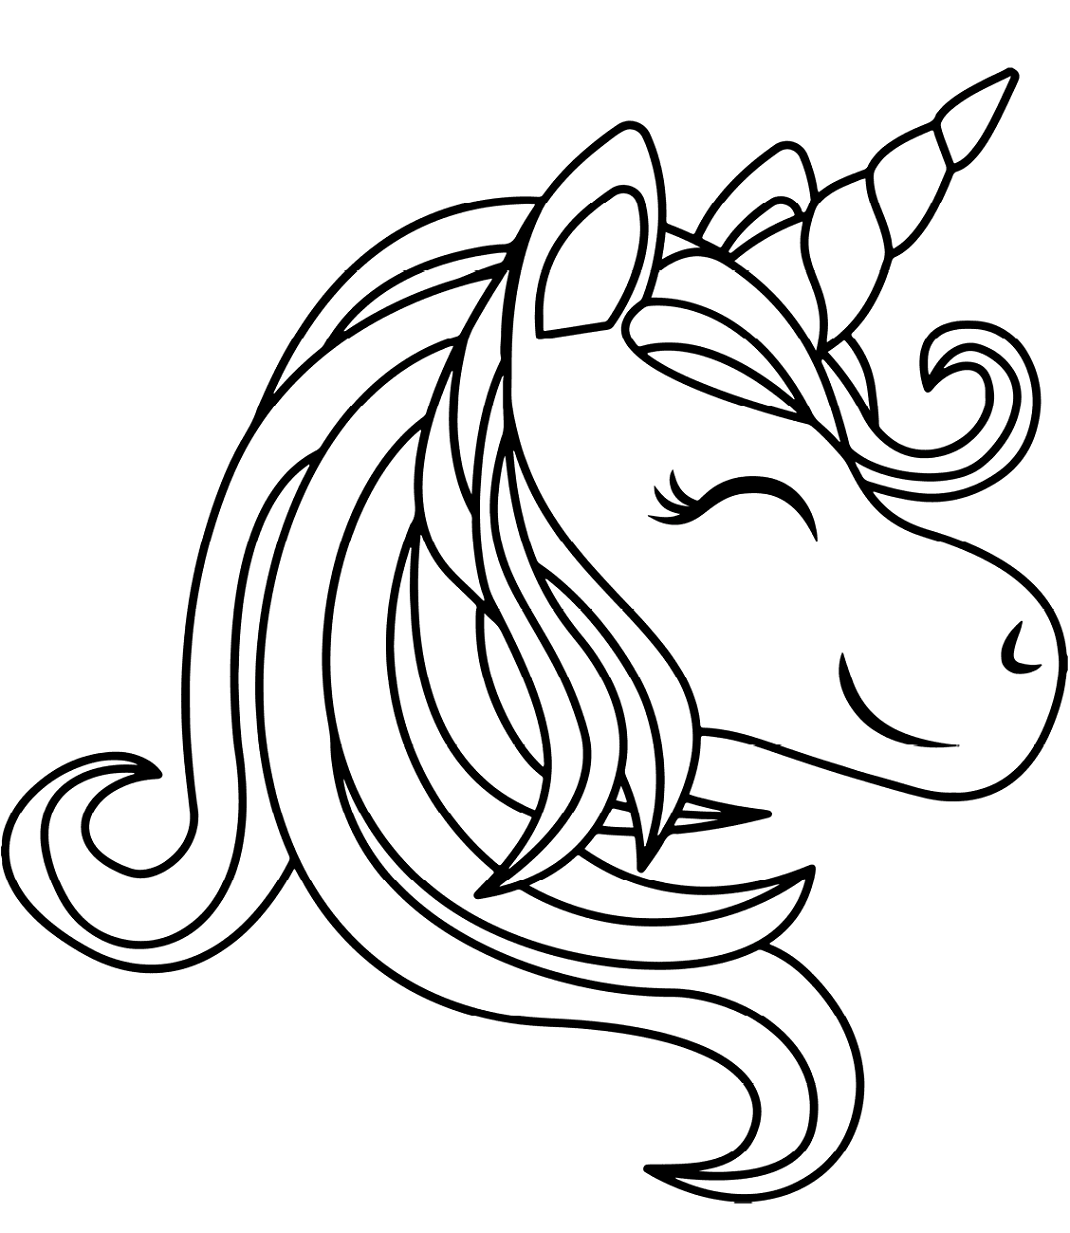 Unicorn Head Smiling Coloring Page - Free Printable ...